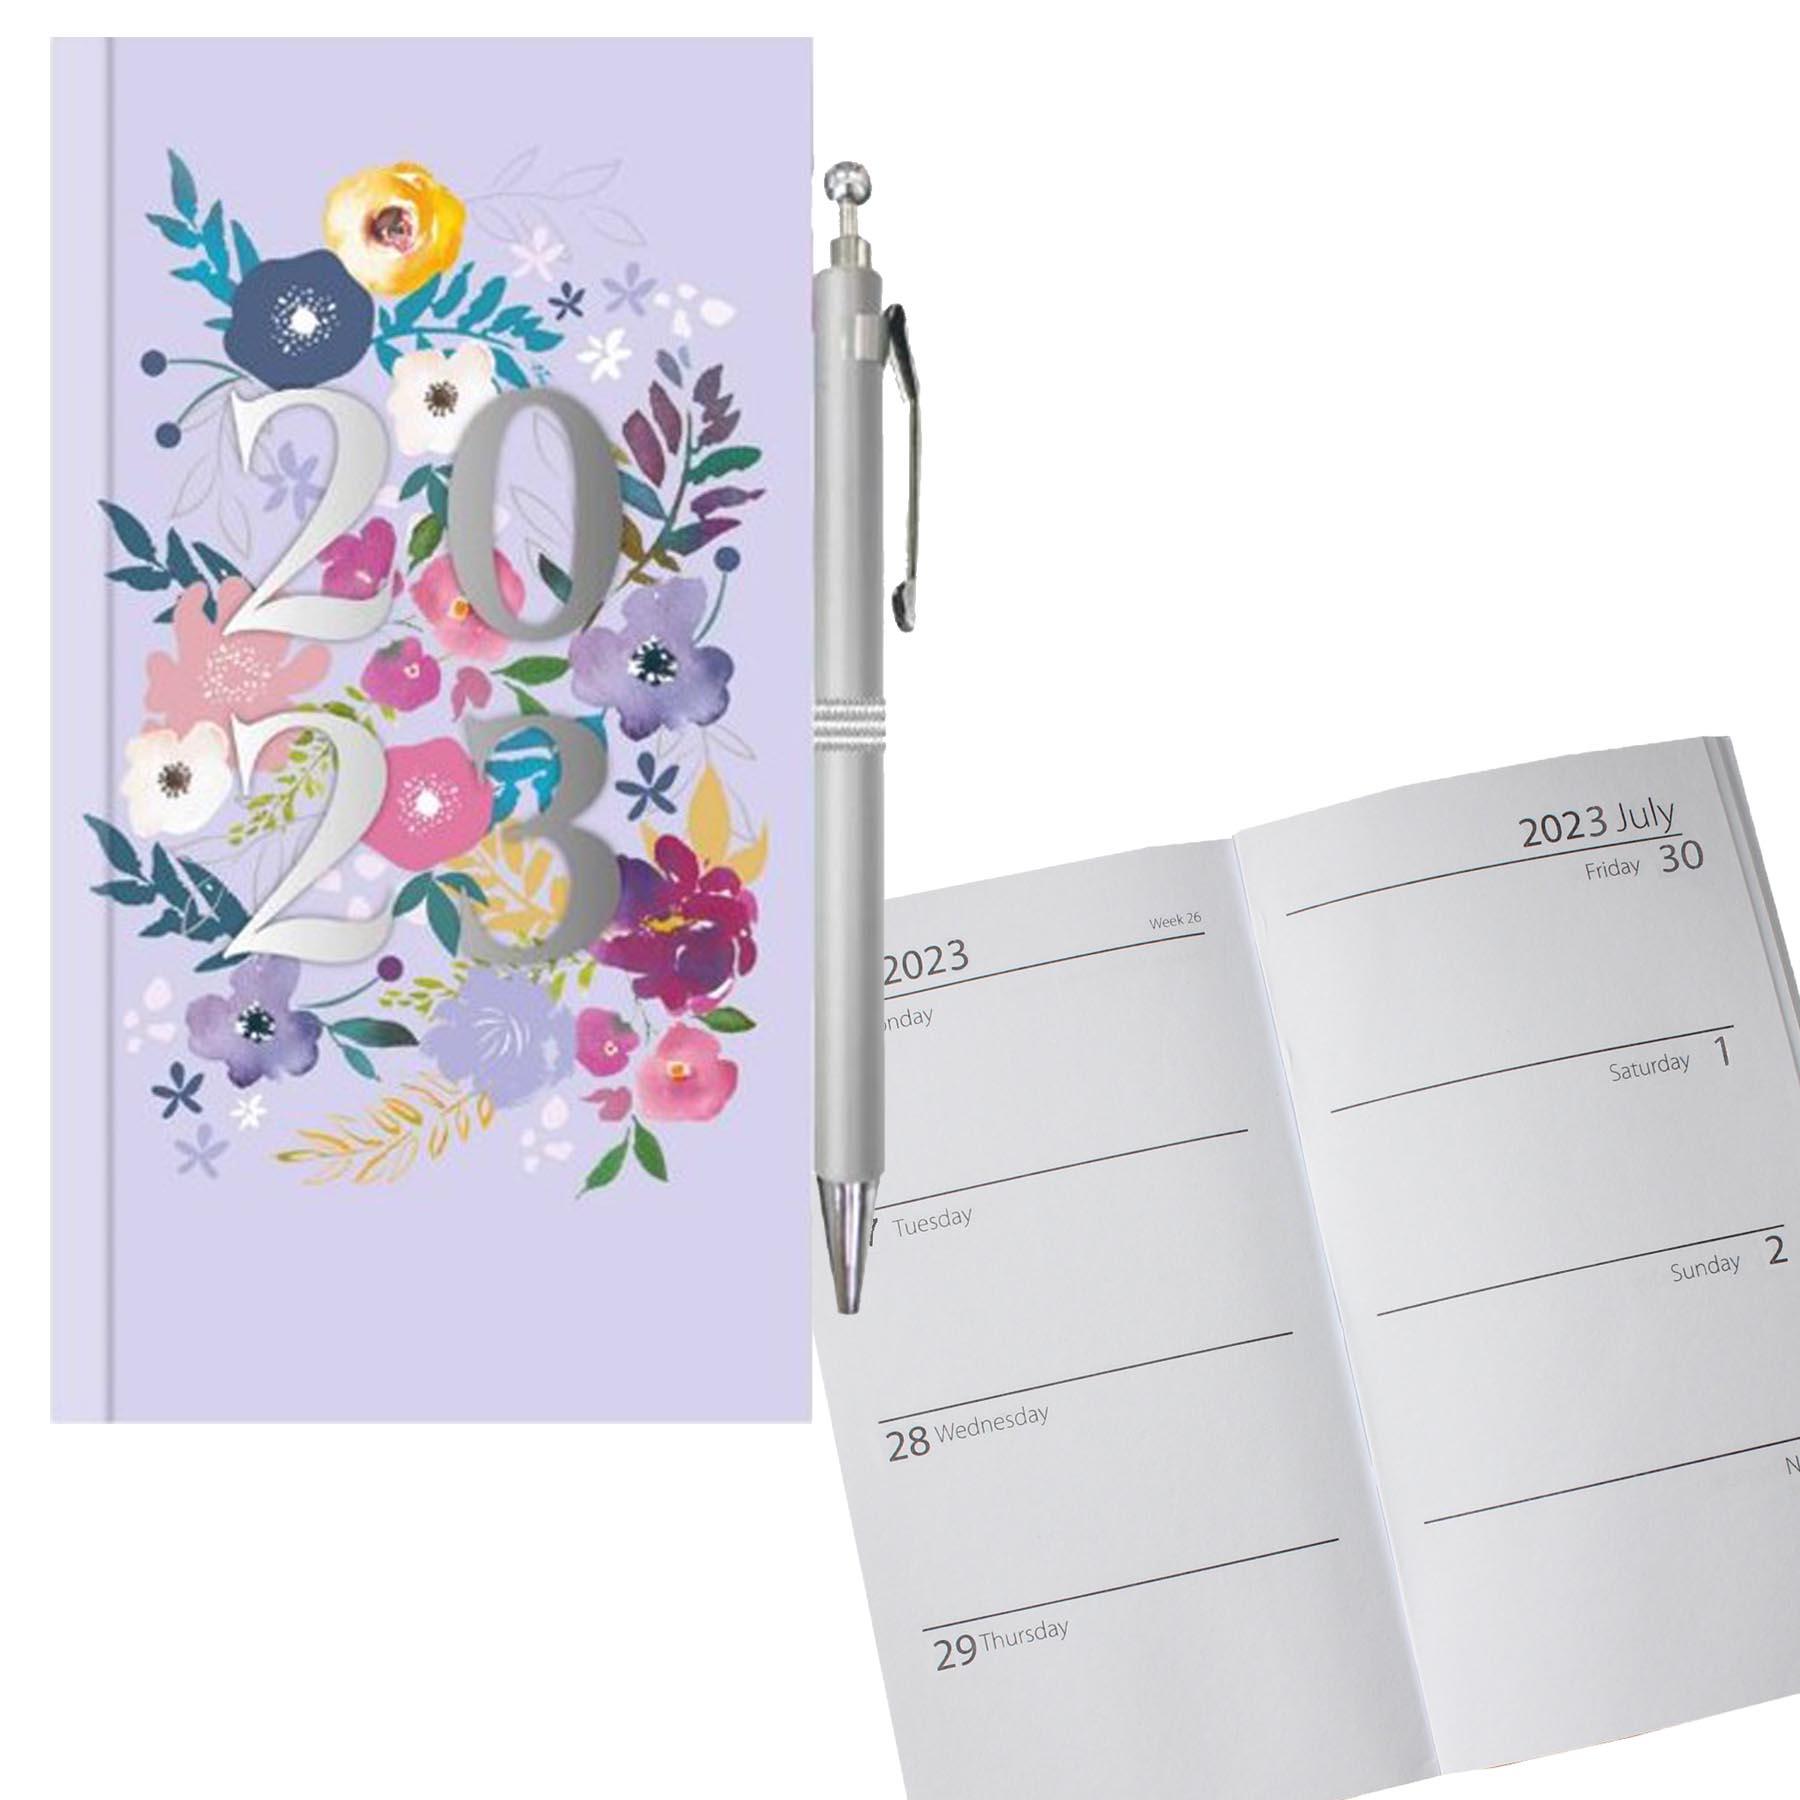 2023 Slimline Week To View Diary and Pen 0824 - Purple with Flowers